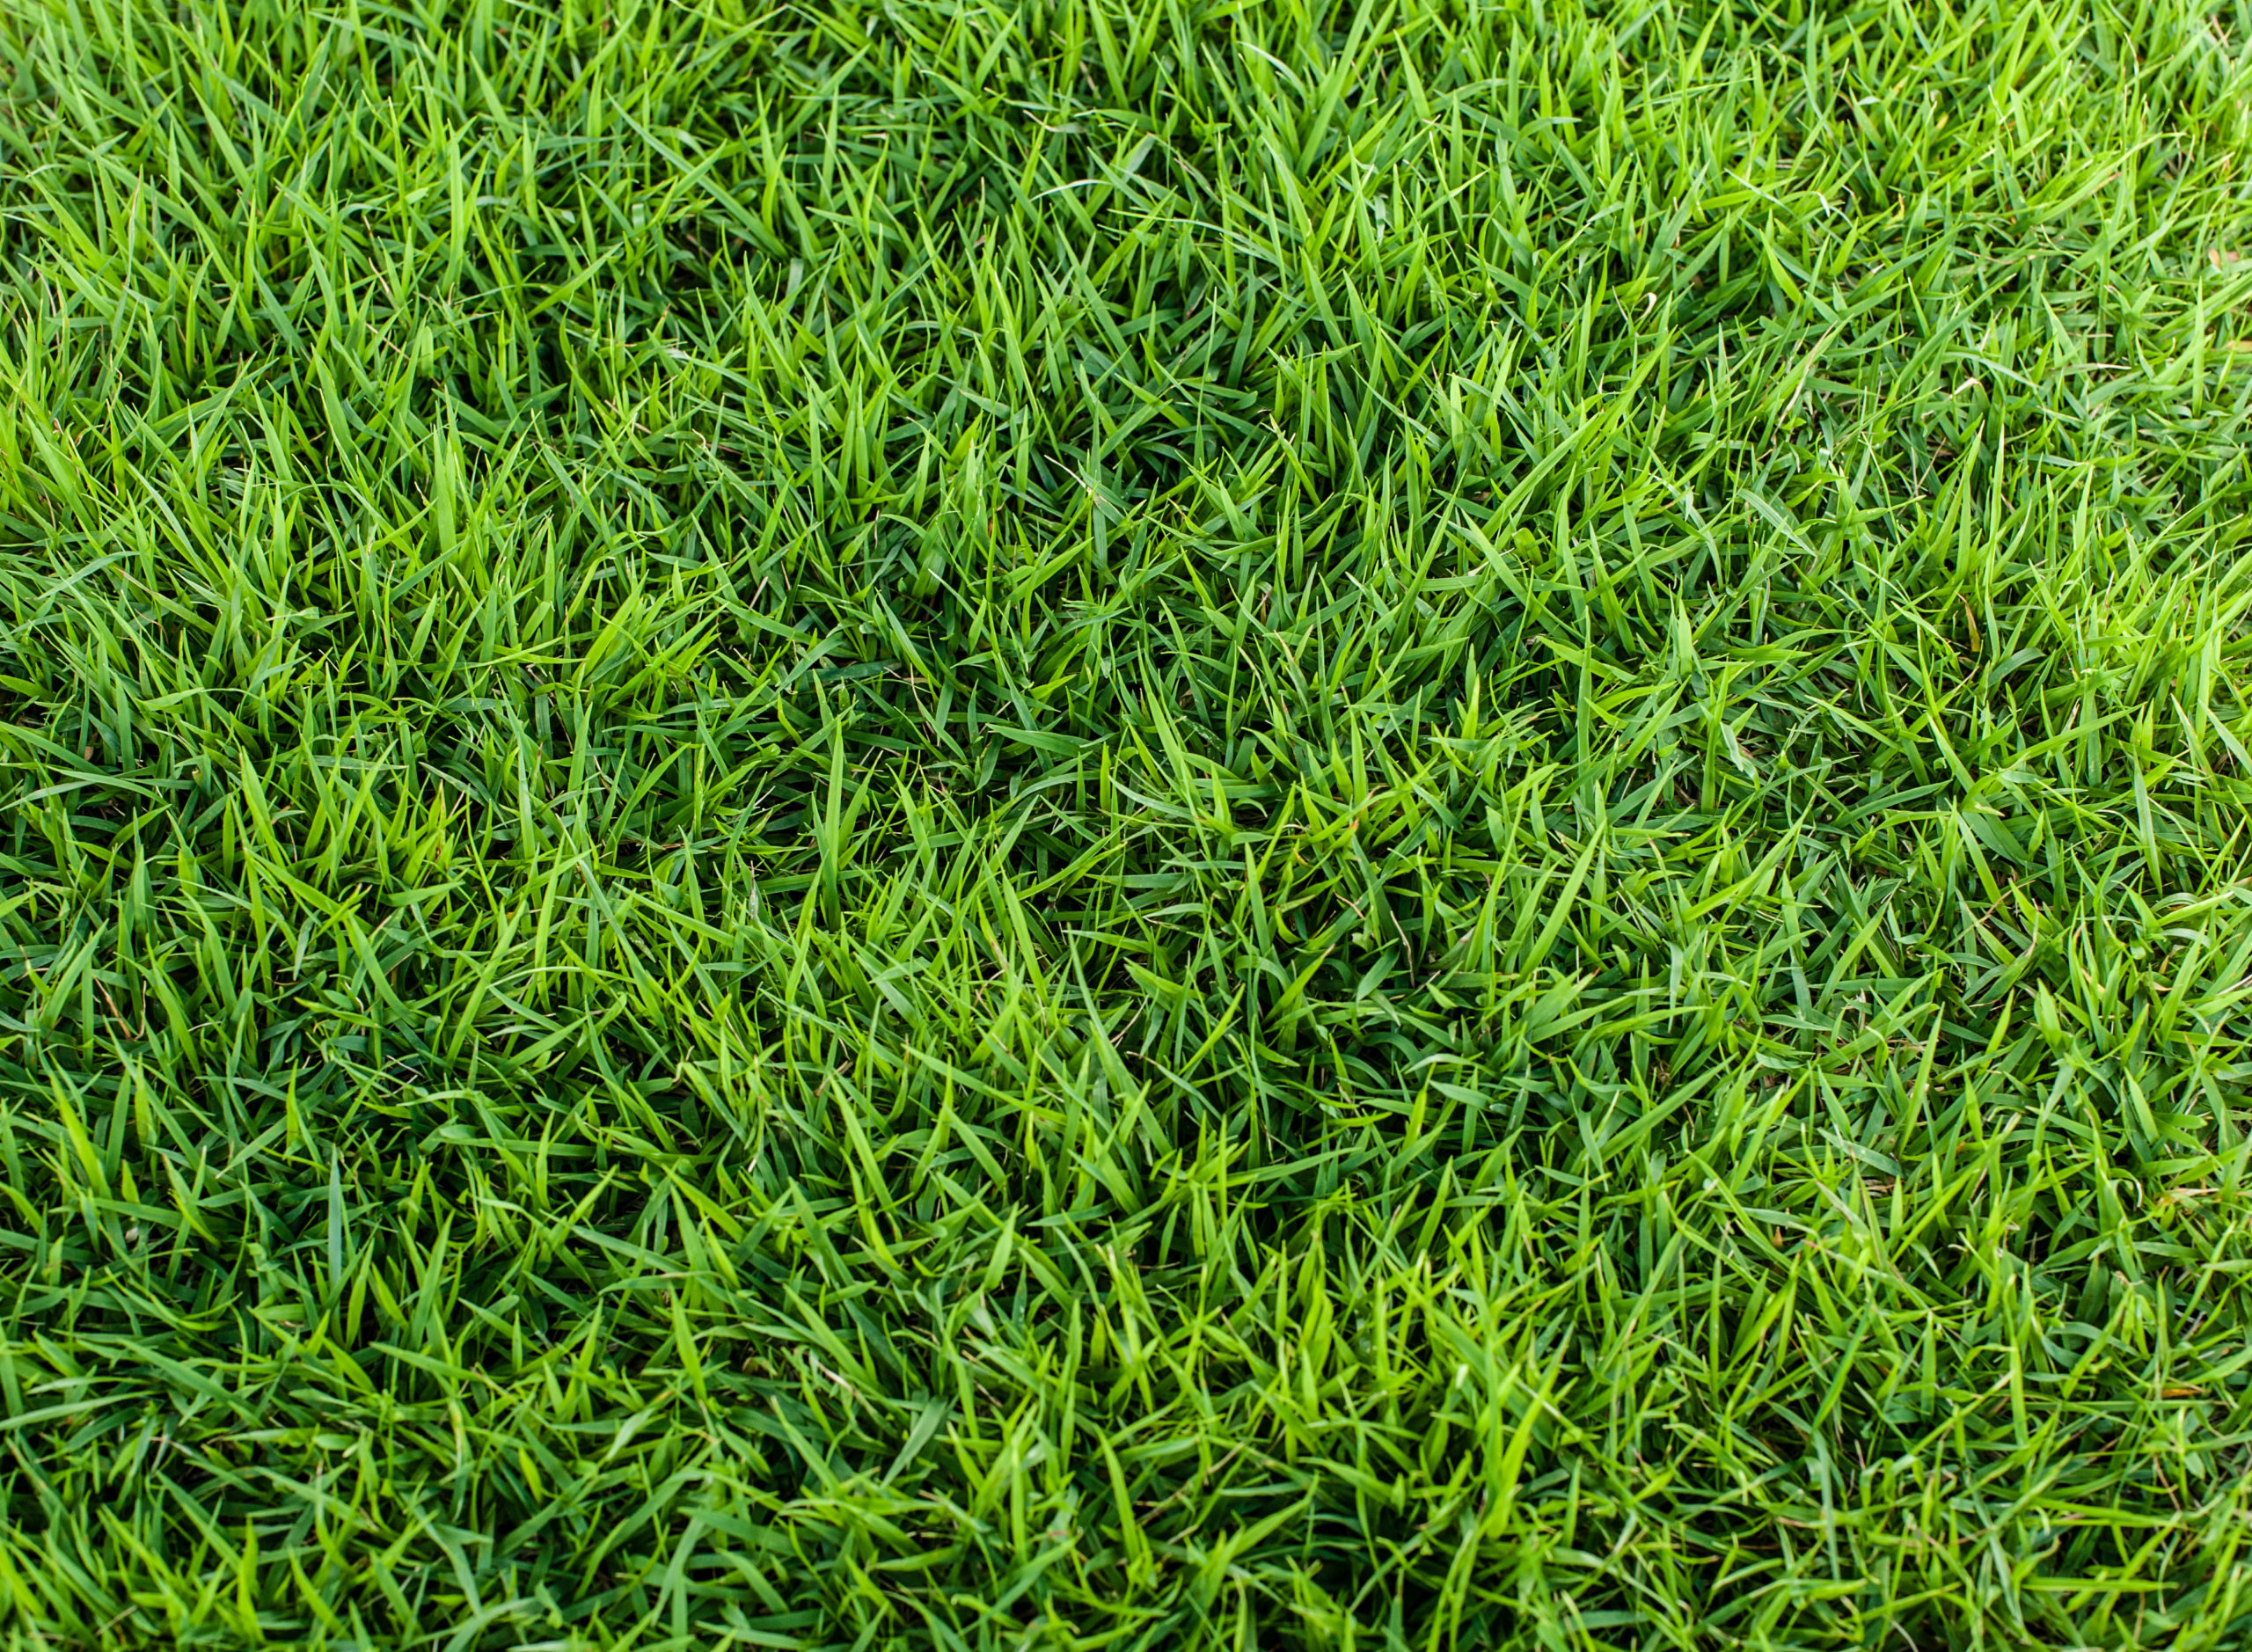 How to Ensure Your Artificial Grass Lasts for 20 Years